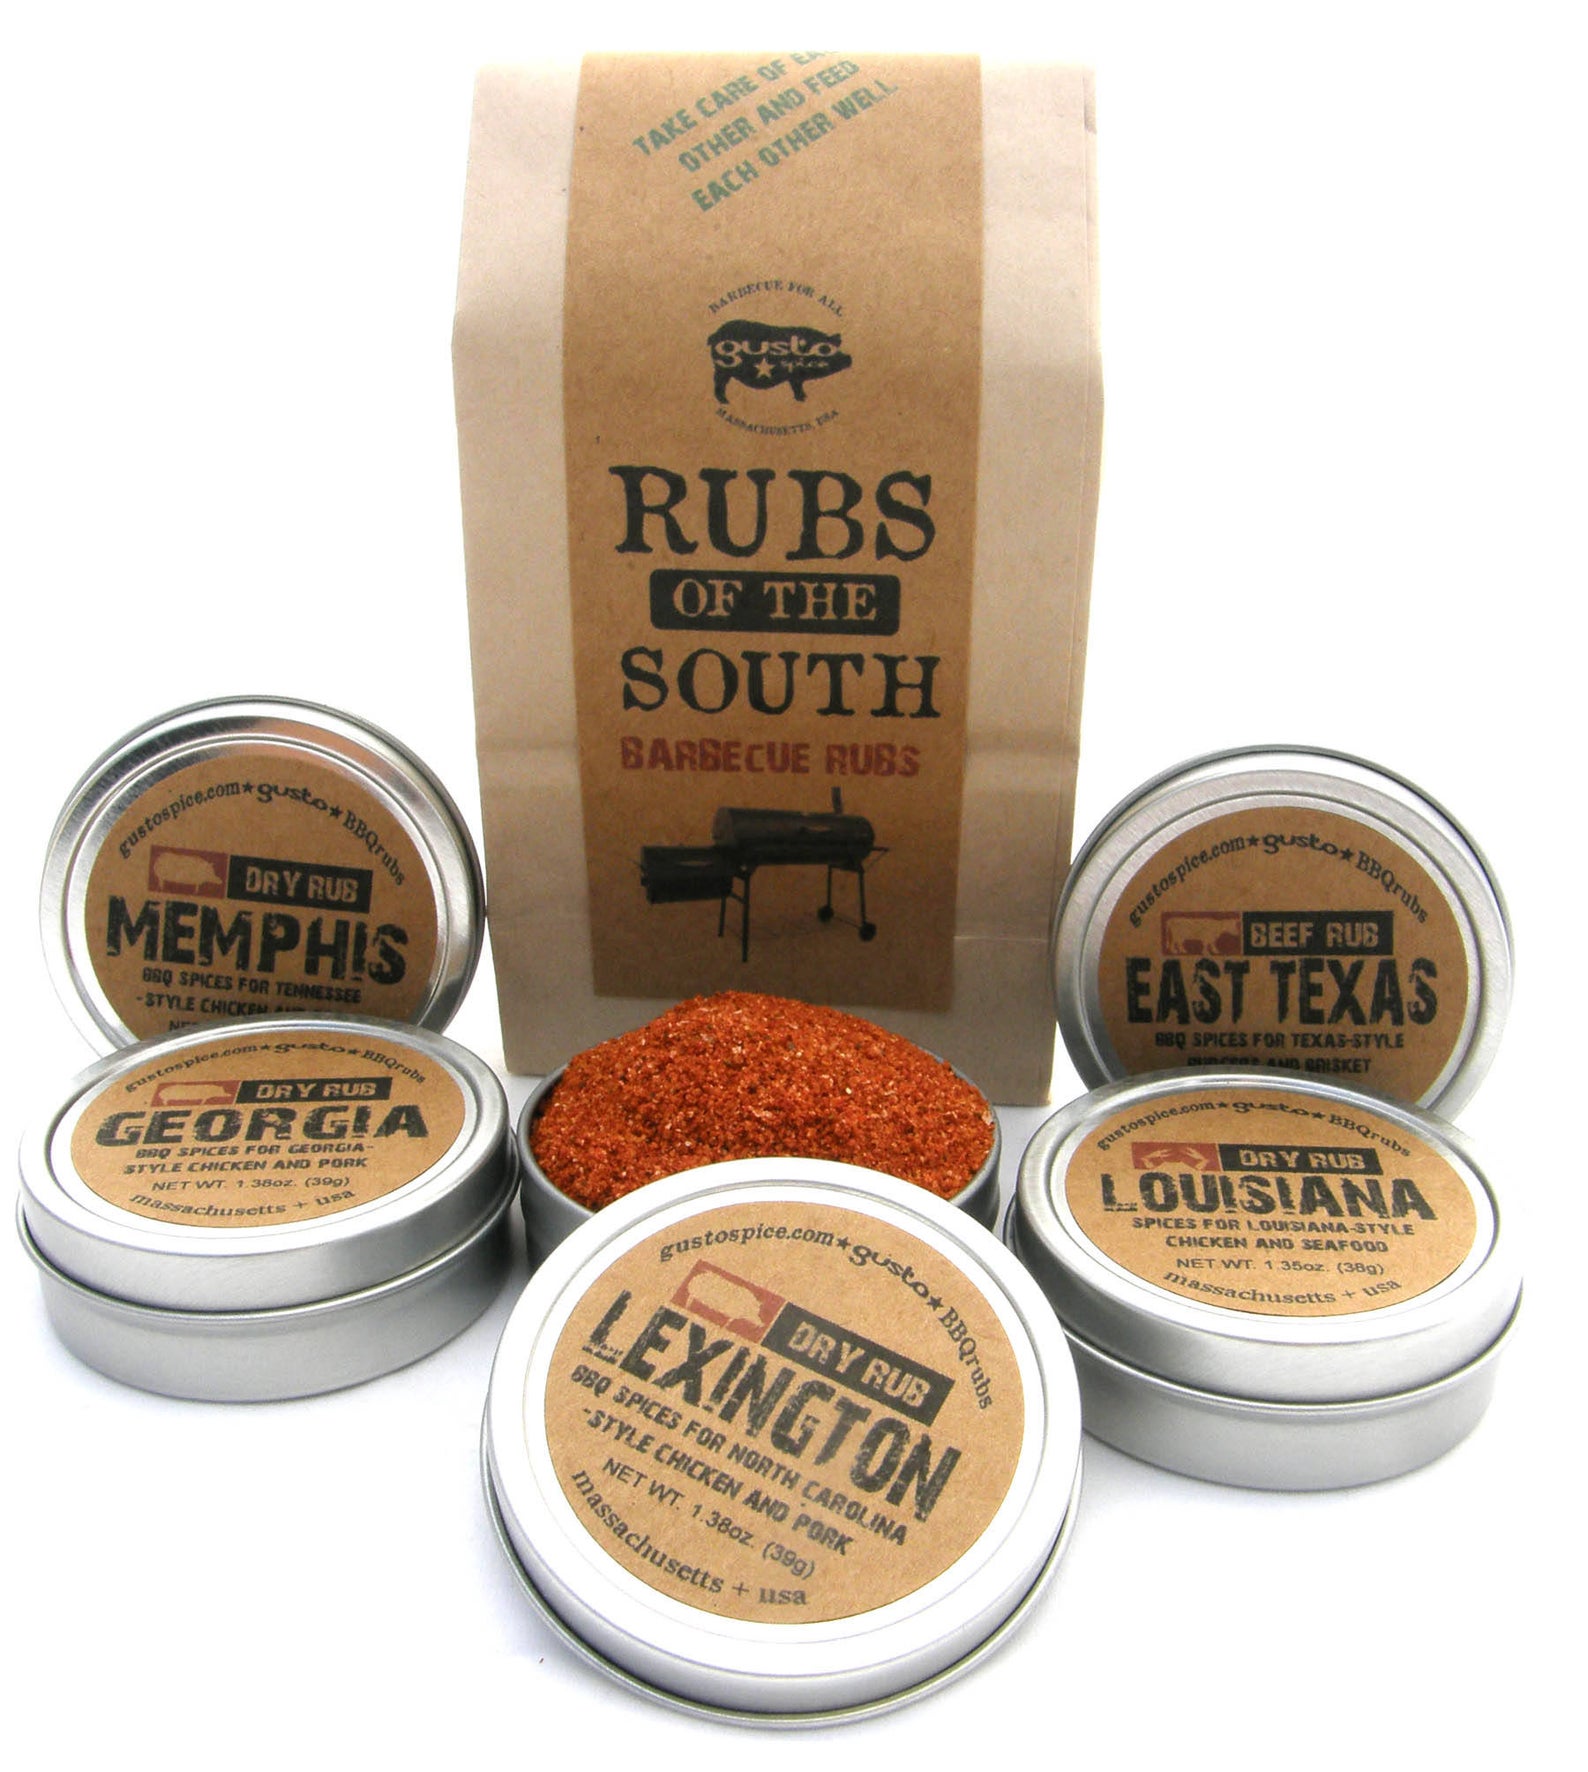 Rubs of the South Gift Set by Gusto Spice